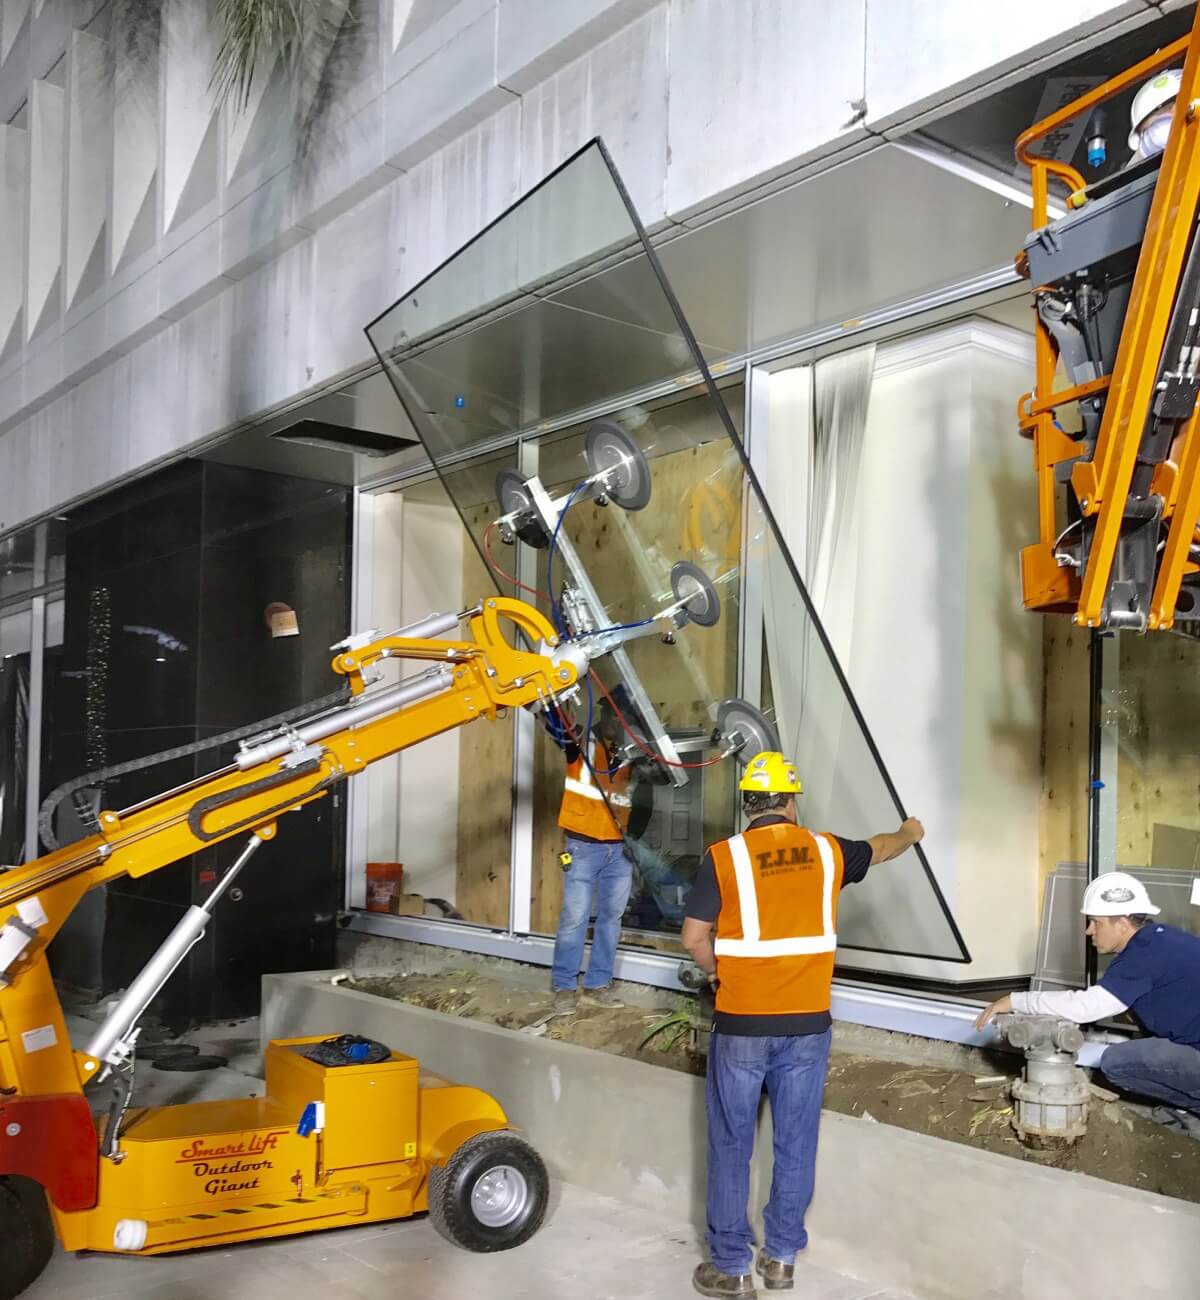 The TJM crew install a giant glass pane into the curtain wall installation of 9401 Wilshire. Branding isn't just a logo on a shirt, it's how people feel when they see the crew show up wearing that shirt.